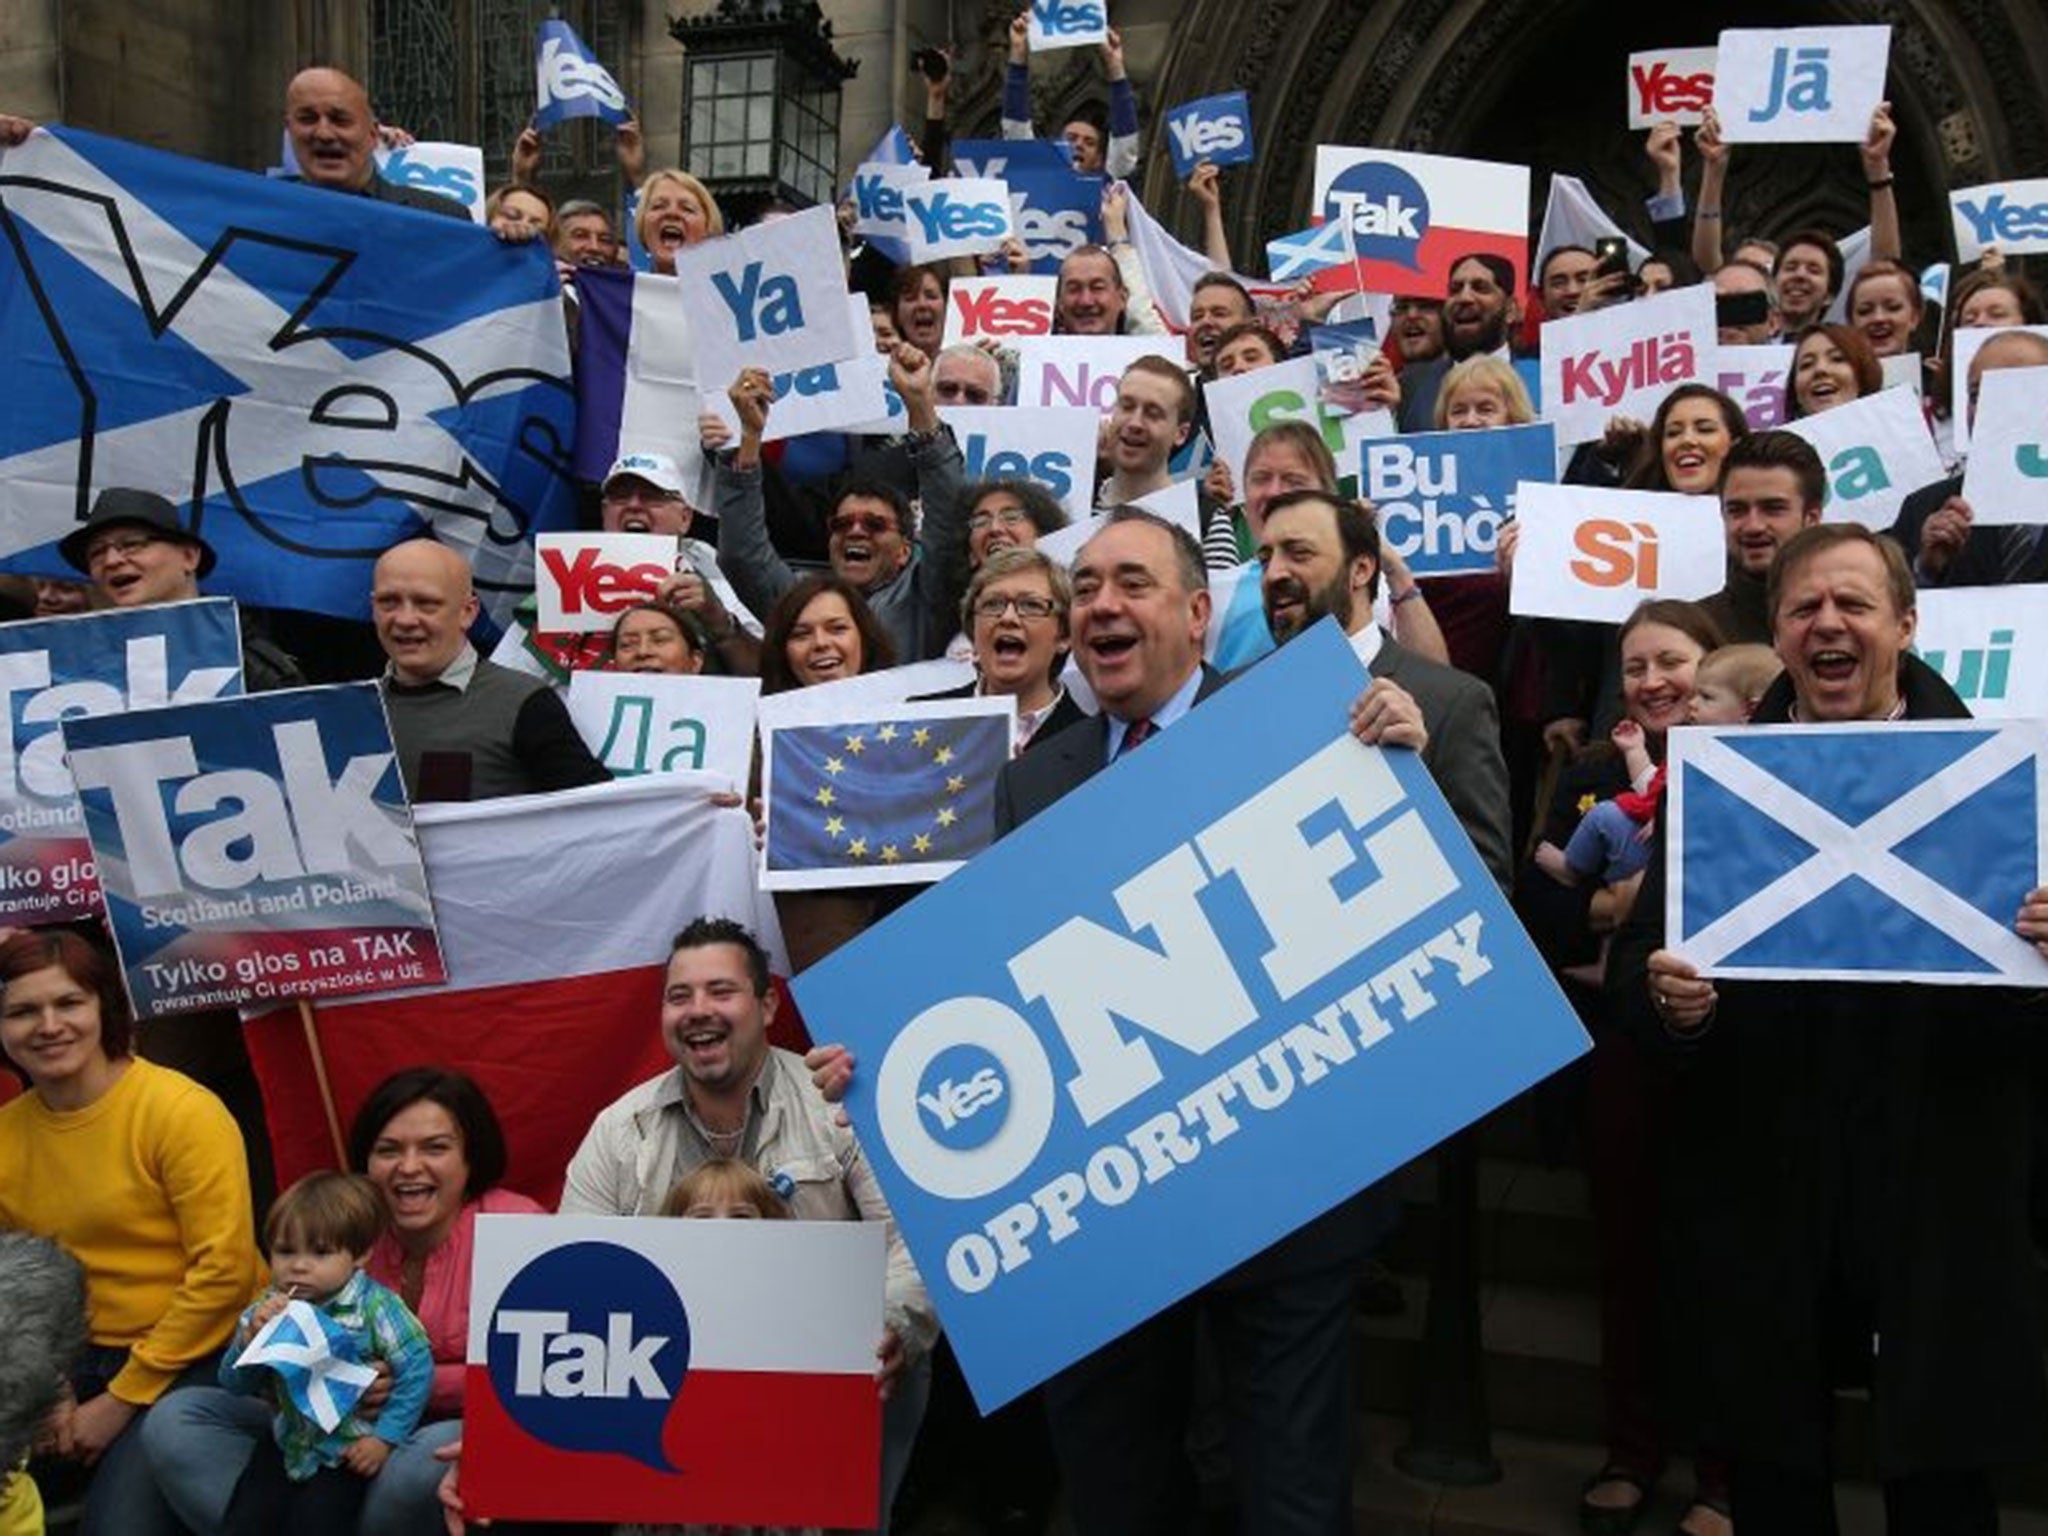 Scottish First Minister Alex Salmond, front center, meets with Scots and other European citizens to celebrate European citizenship and "Scotland's continued EU membership with a Yes vote" at Parliament Square in Edinburgh, Scotland.